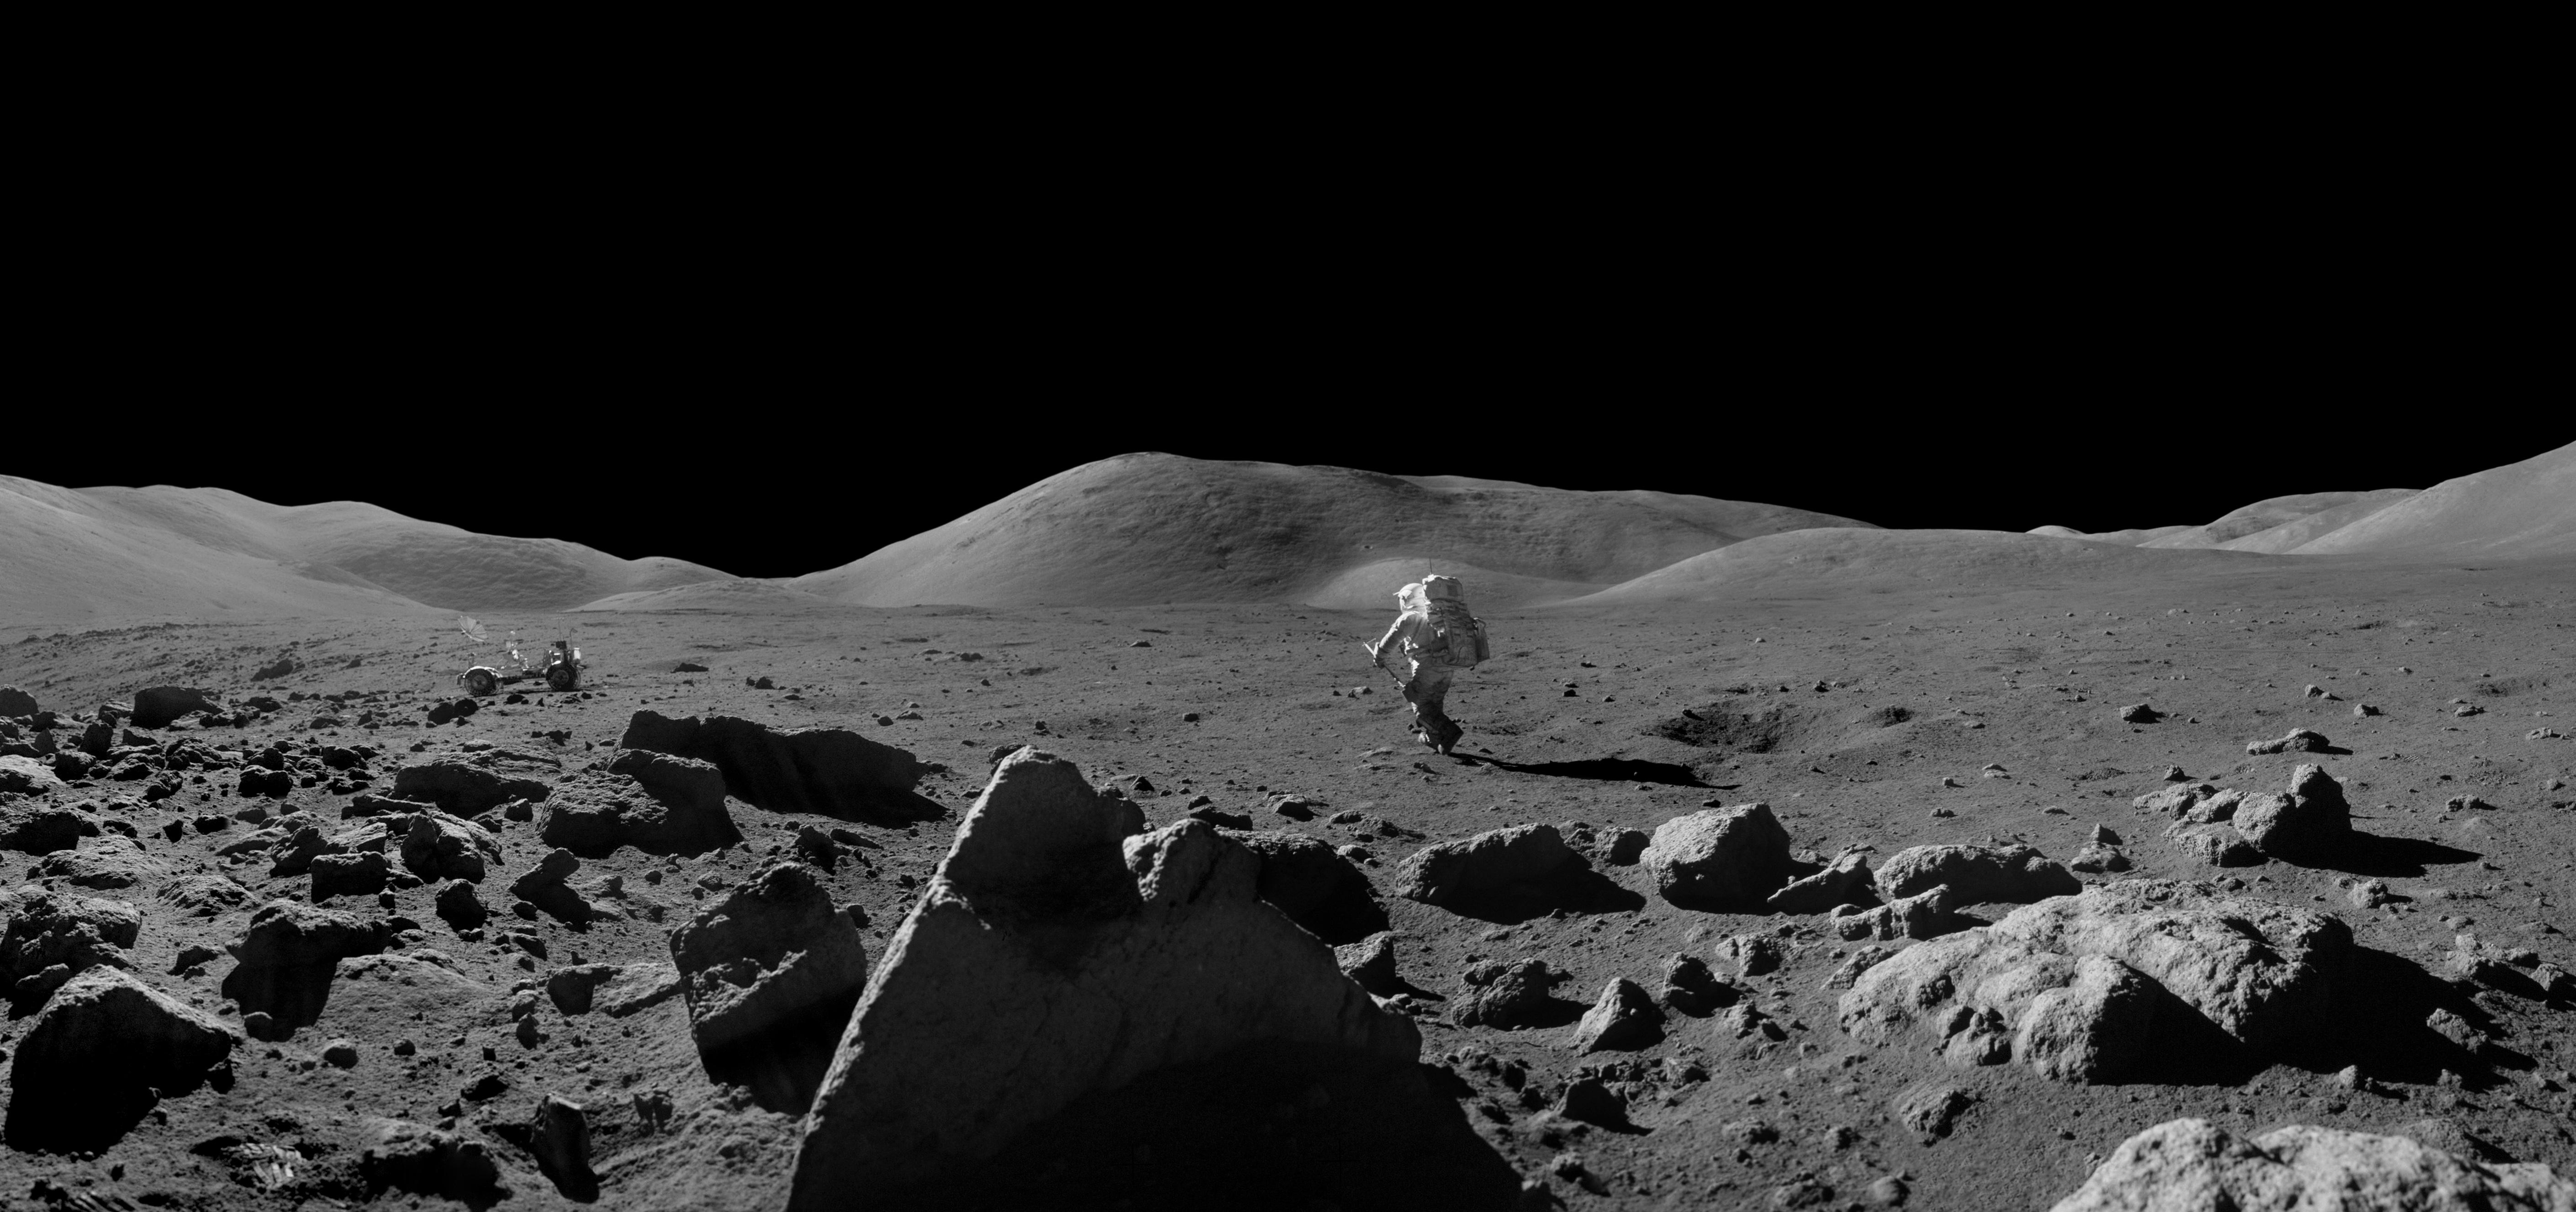 Best 53+ Apollo 17 Wallpapers on HipWallpapers